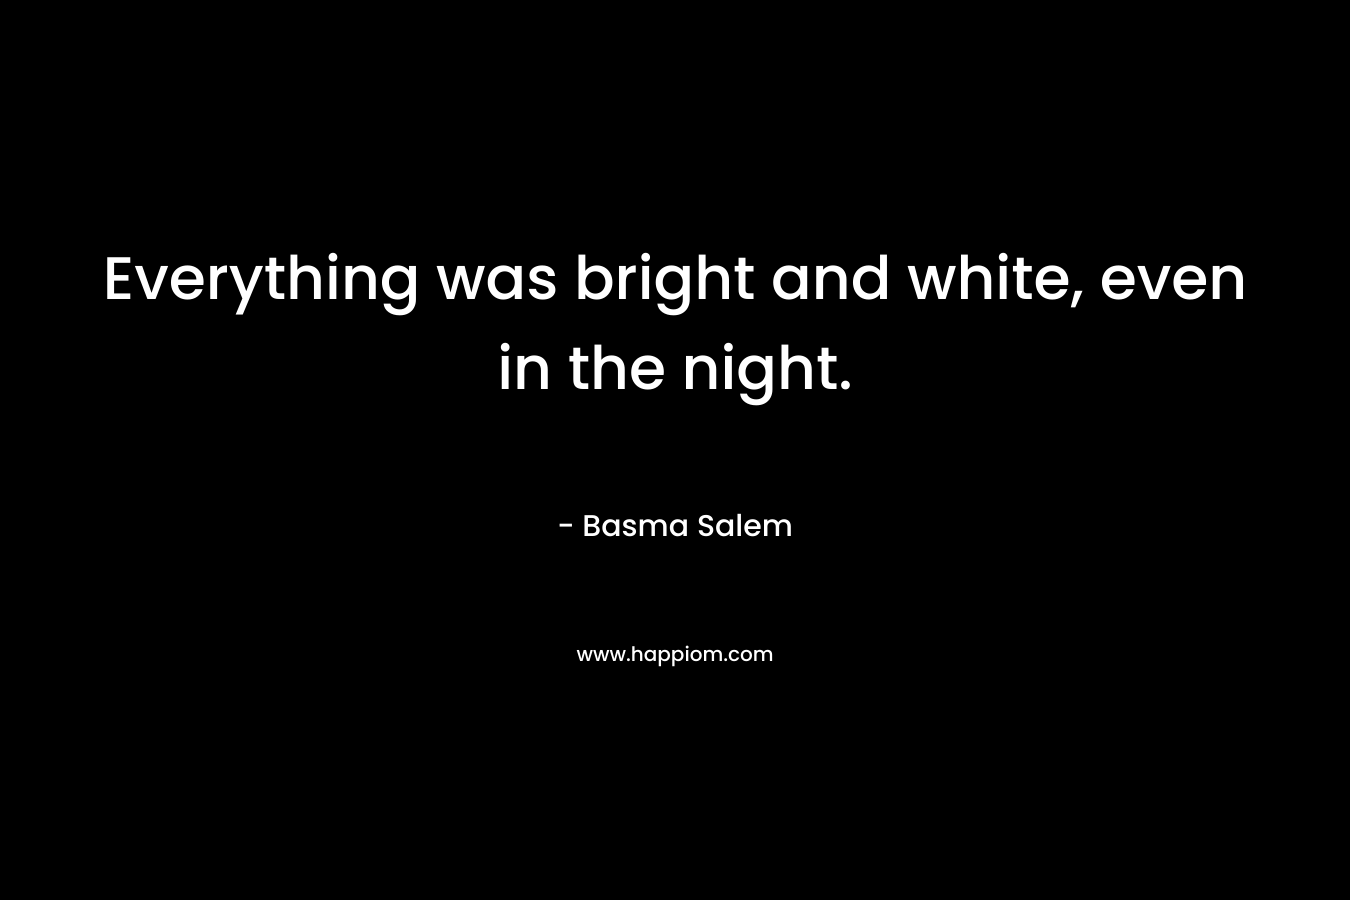 Everything was bright and white, even in the night. – Basma Salem